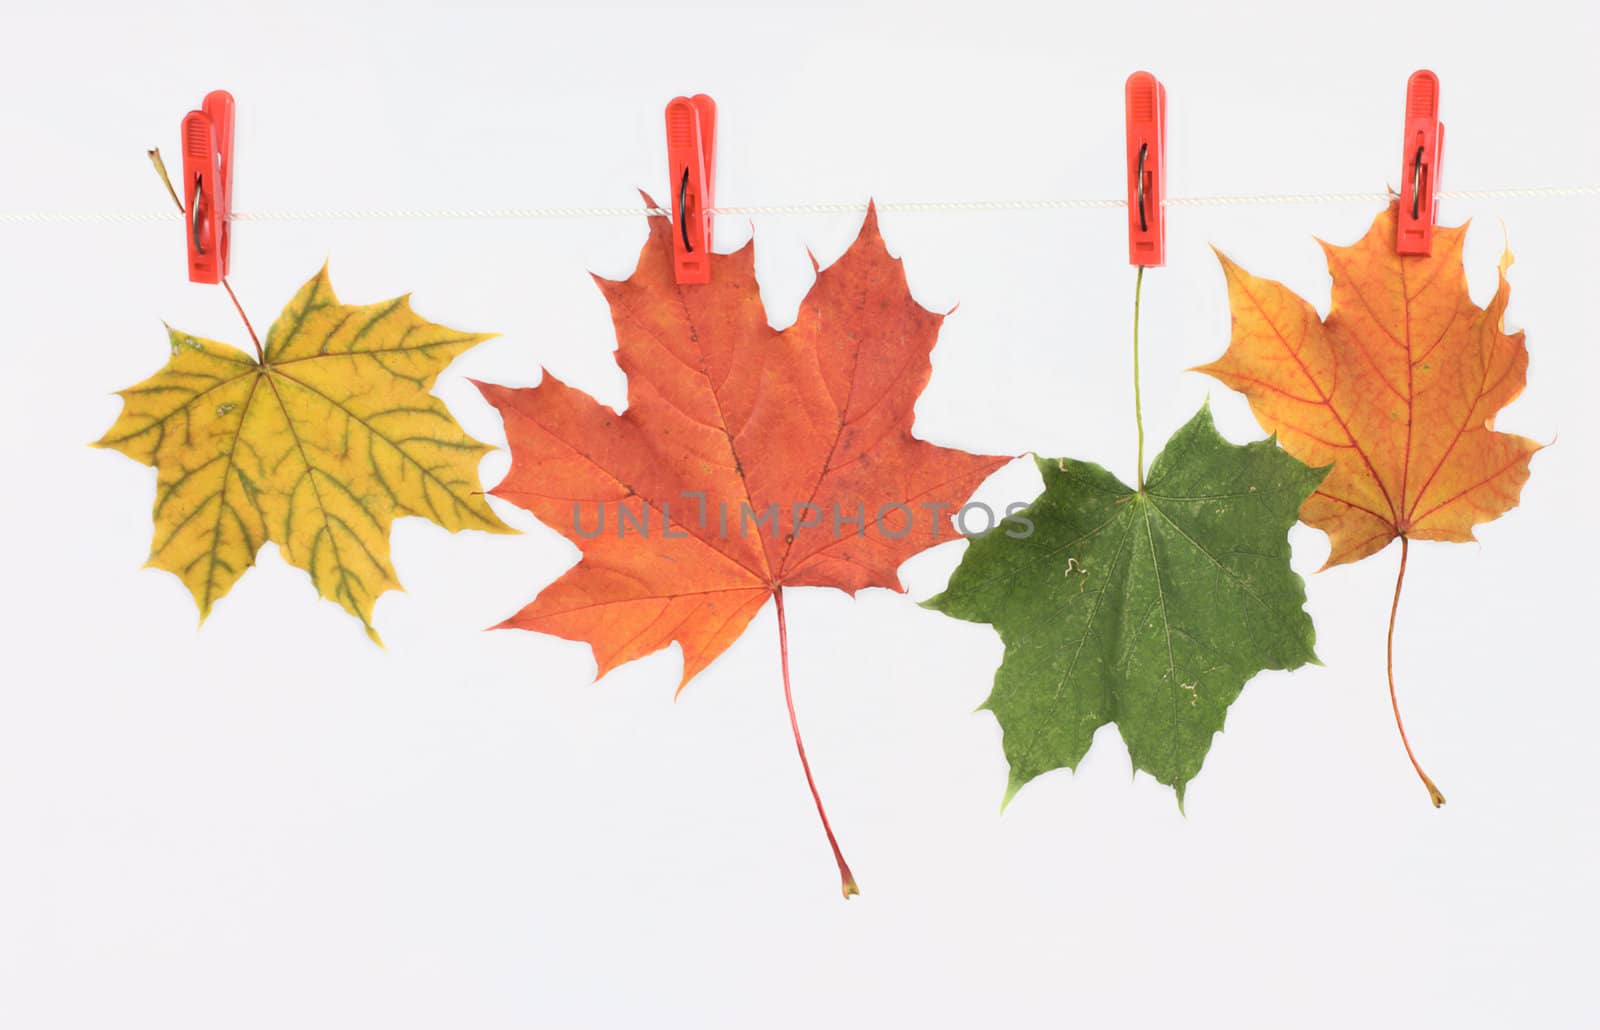 Autumn leaves on a linen cord fixed by red clothespins